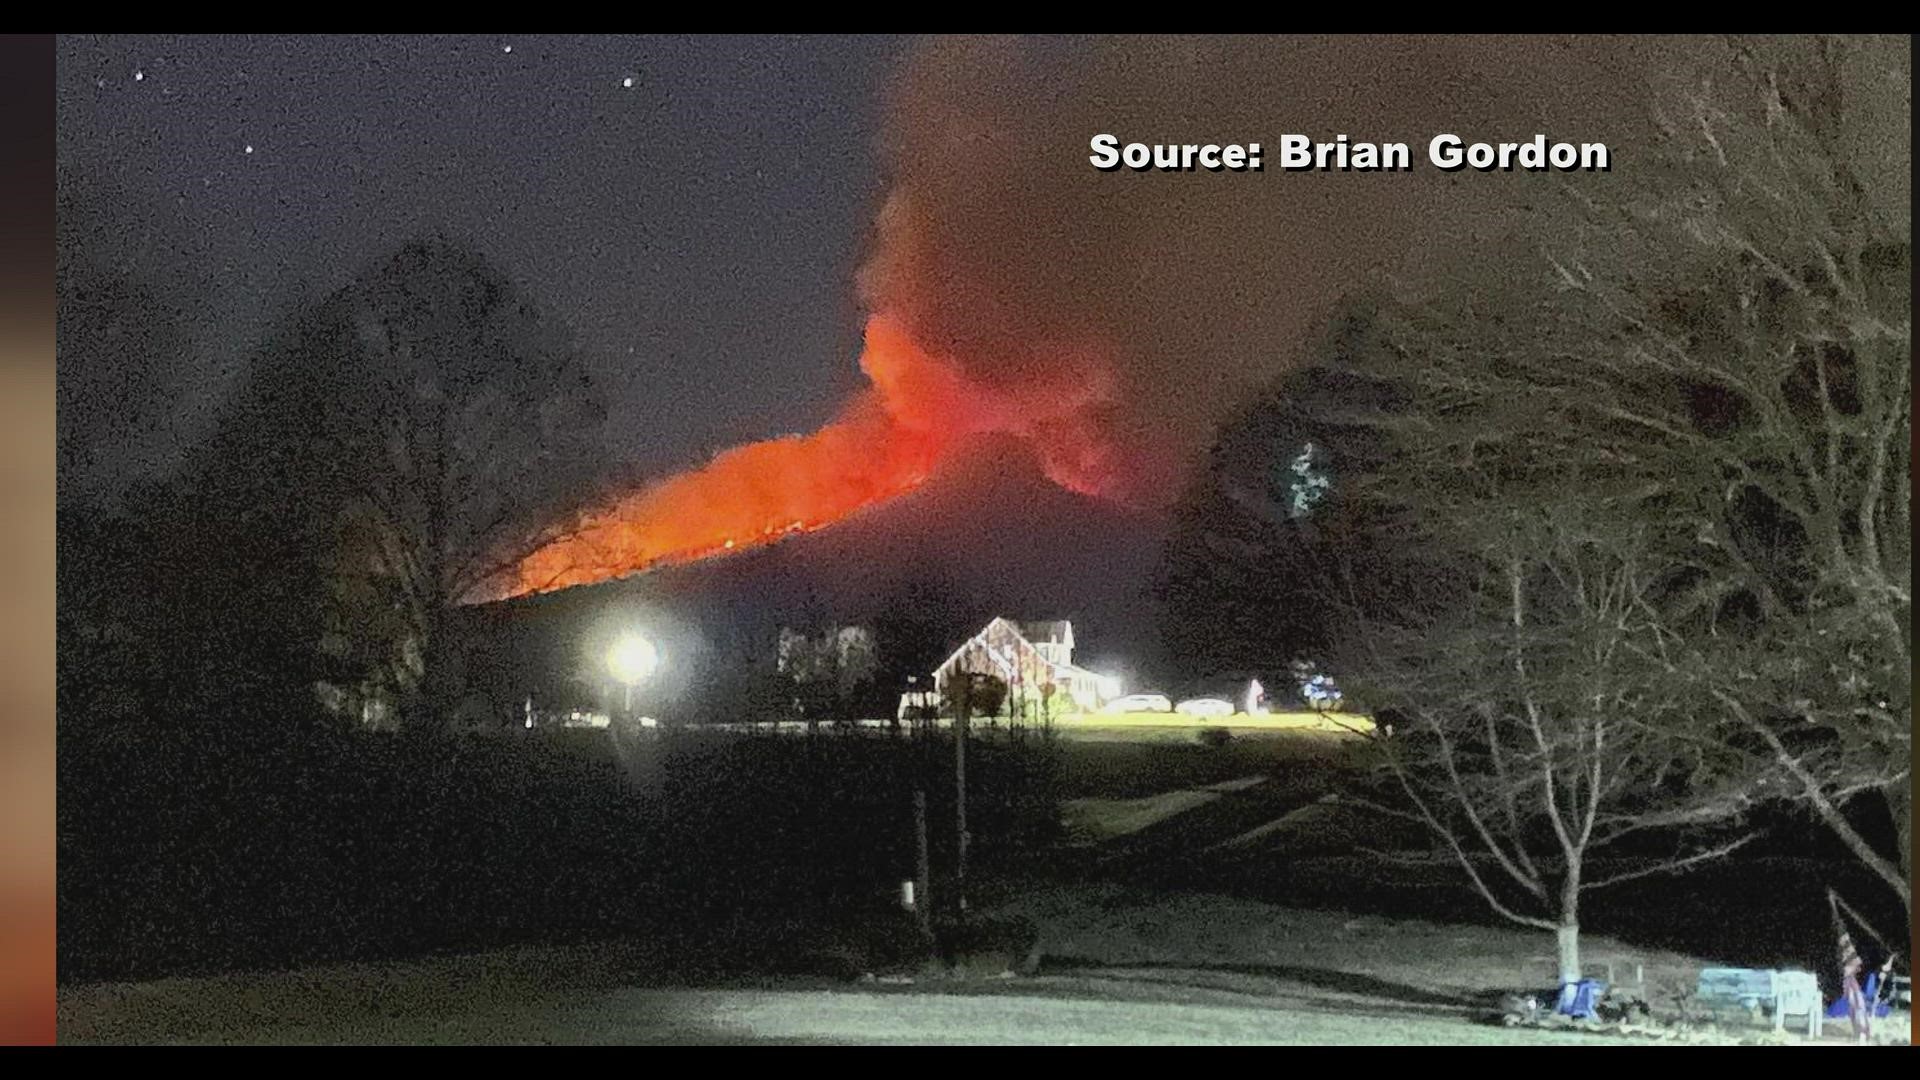 Dwayne Young shares his views of the Pilot Mountain fire from Stokes County.